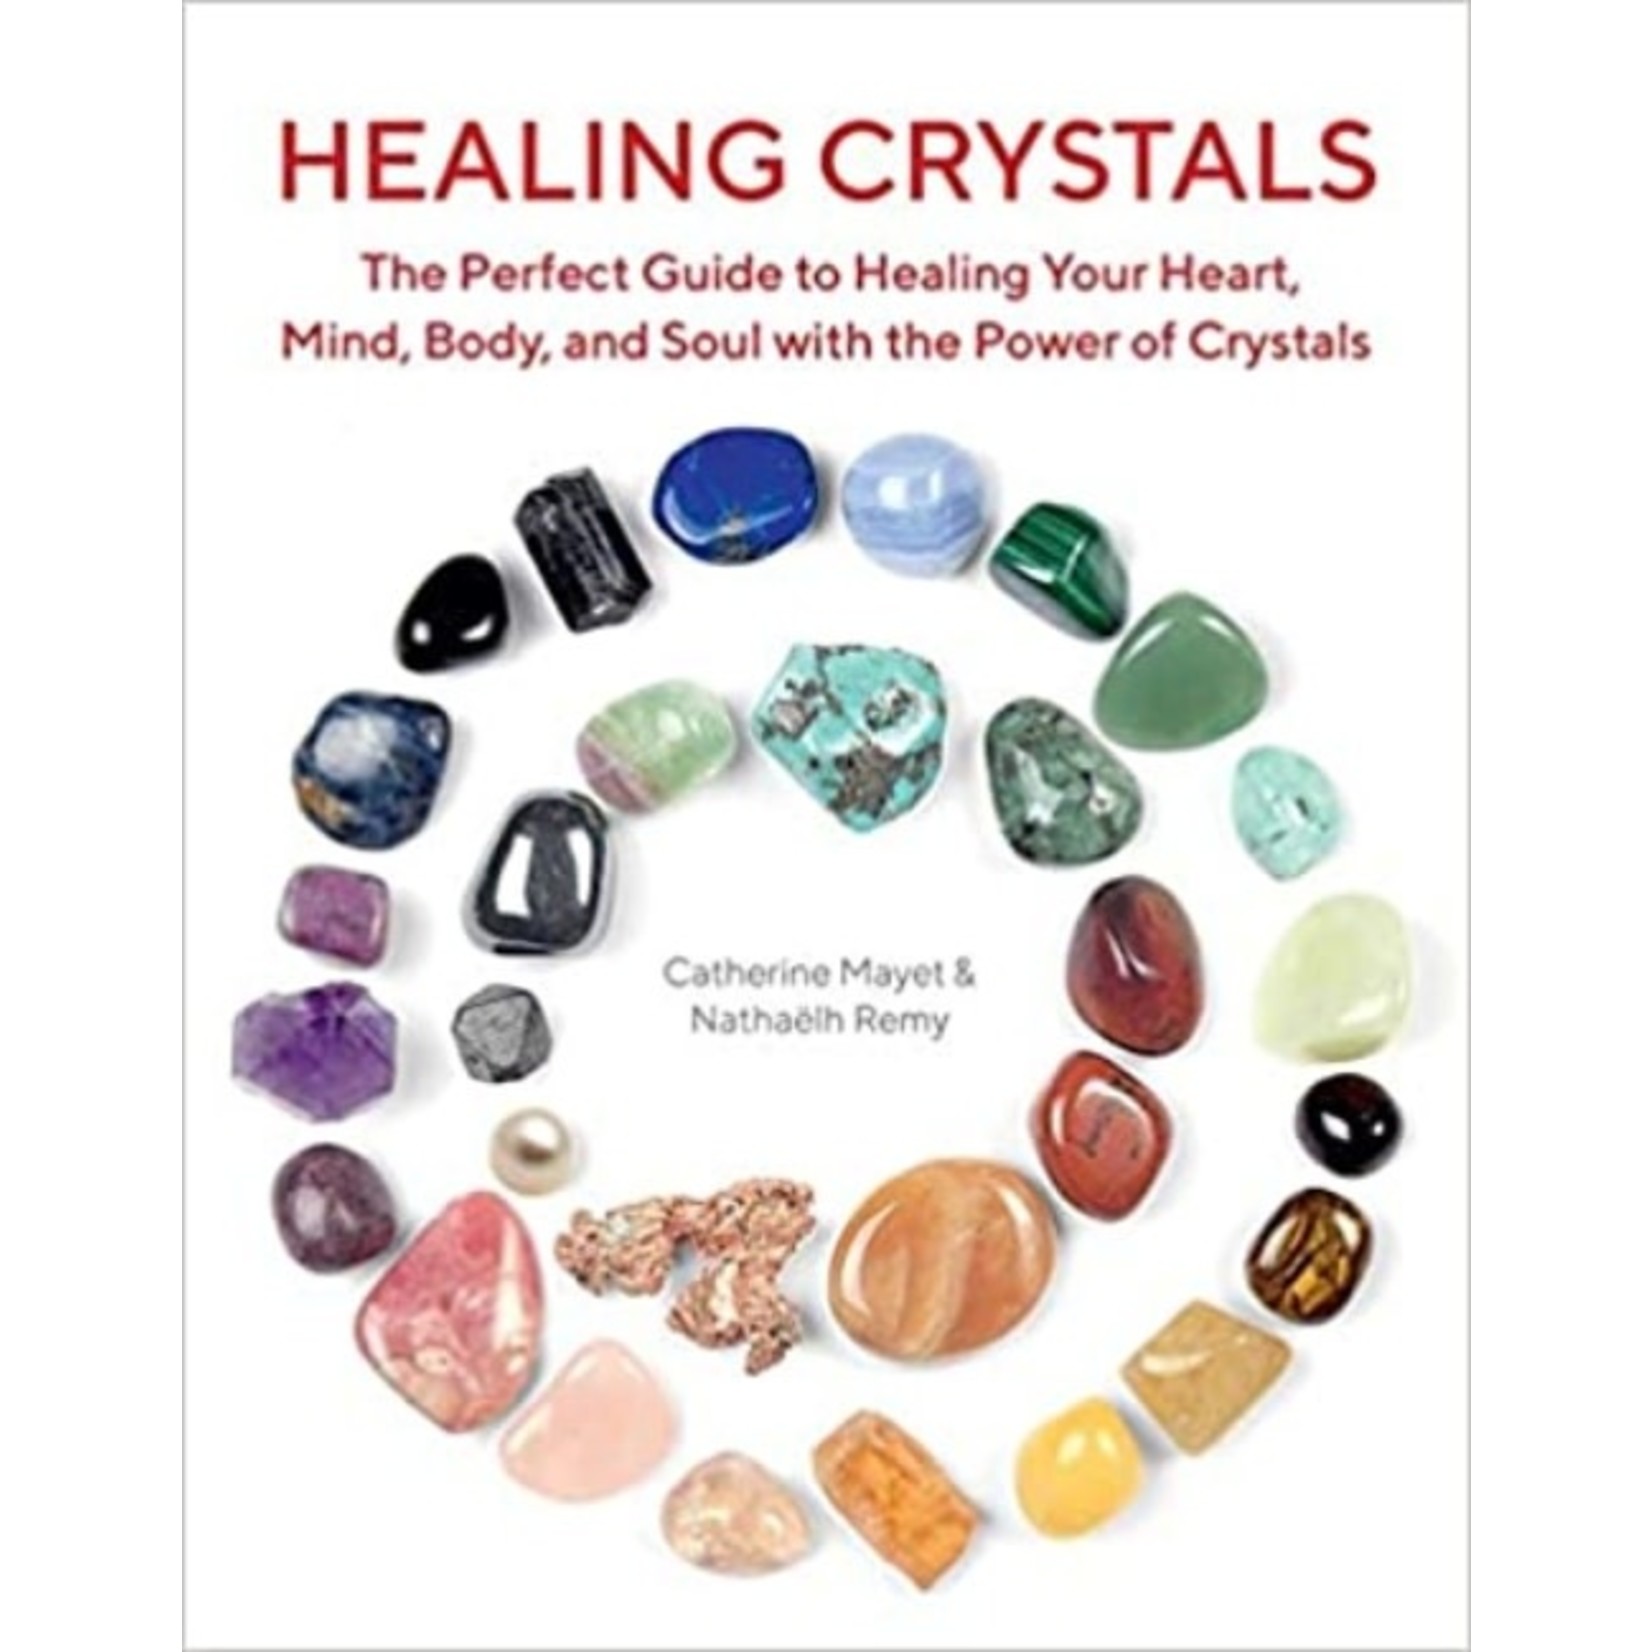 Healing Crystals : The Perfect Guide to Healing Your Heart, Mind, Body, and Soul with the Power of Crystals